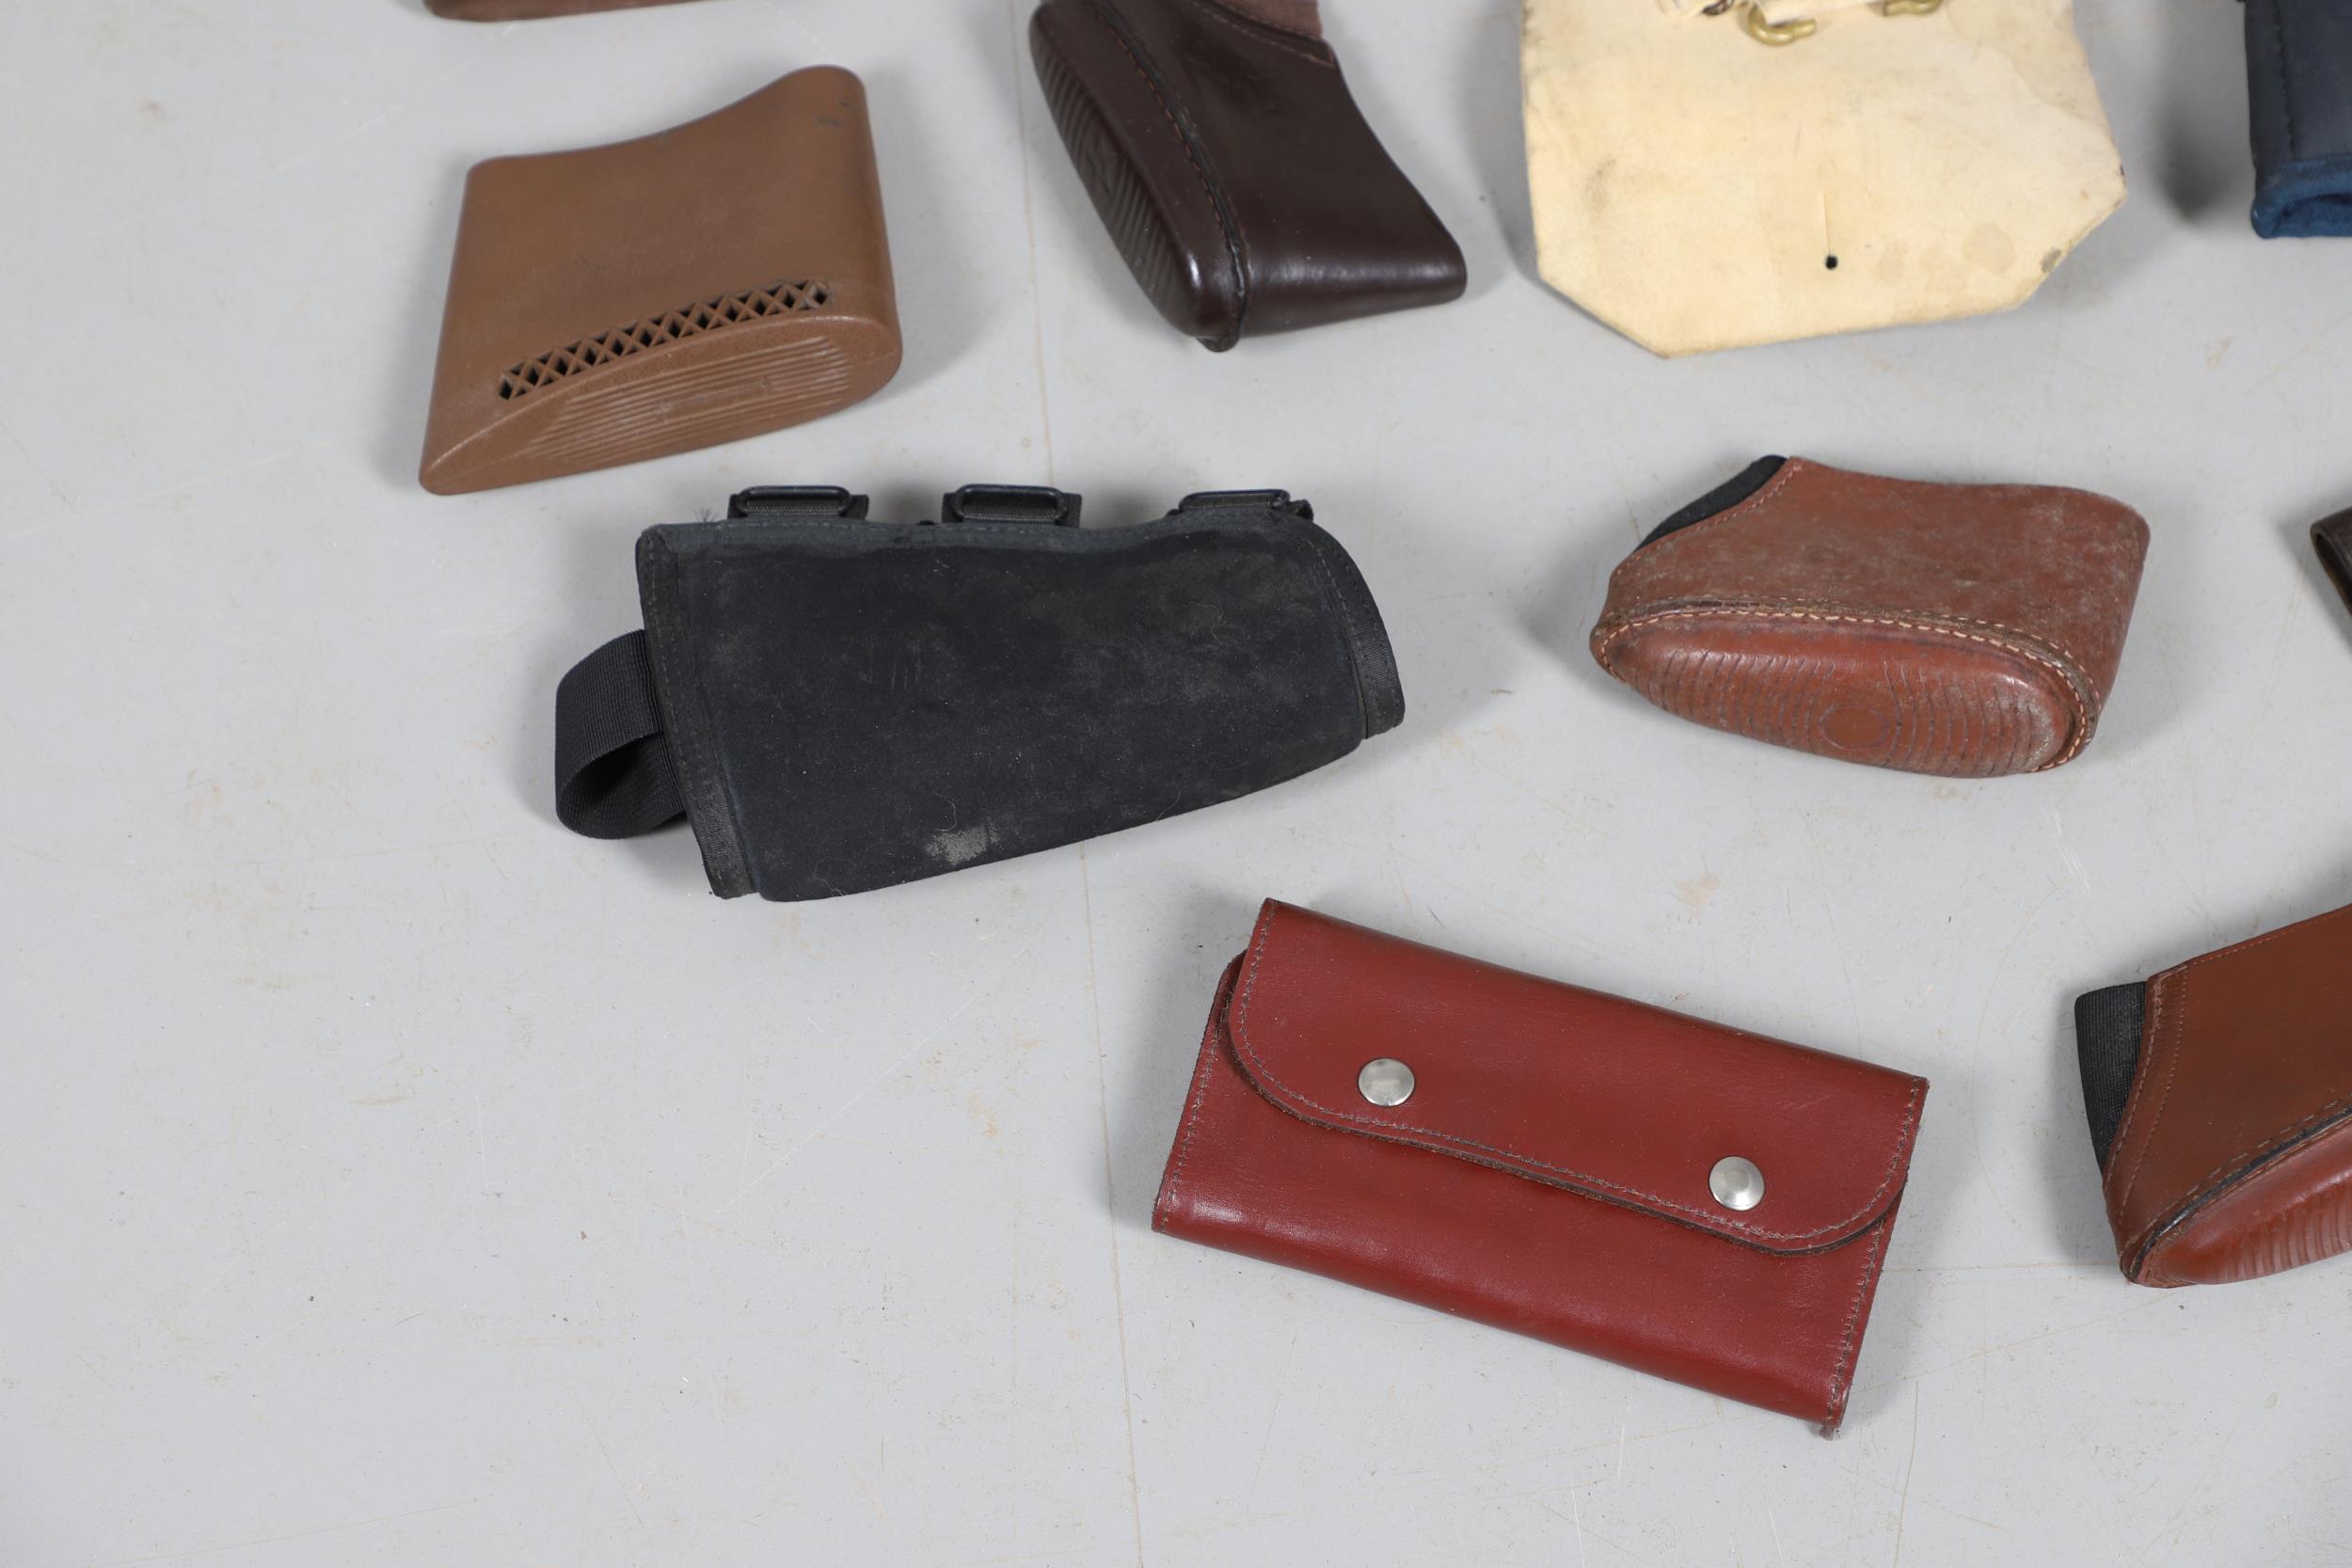 A BROWN LEATHER PISTOL HOLSTER AND OTHERS SIMILAR. - Image 4 of 6